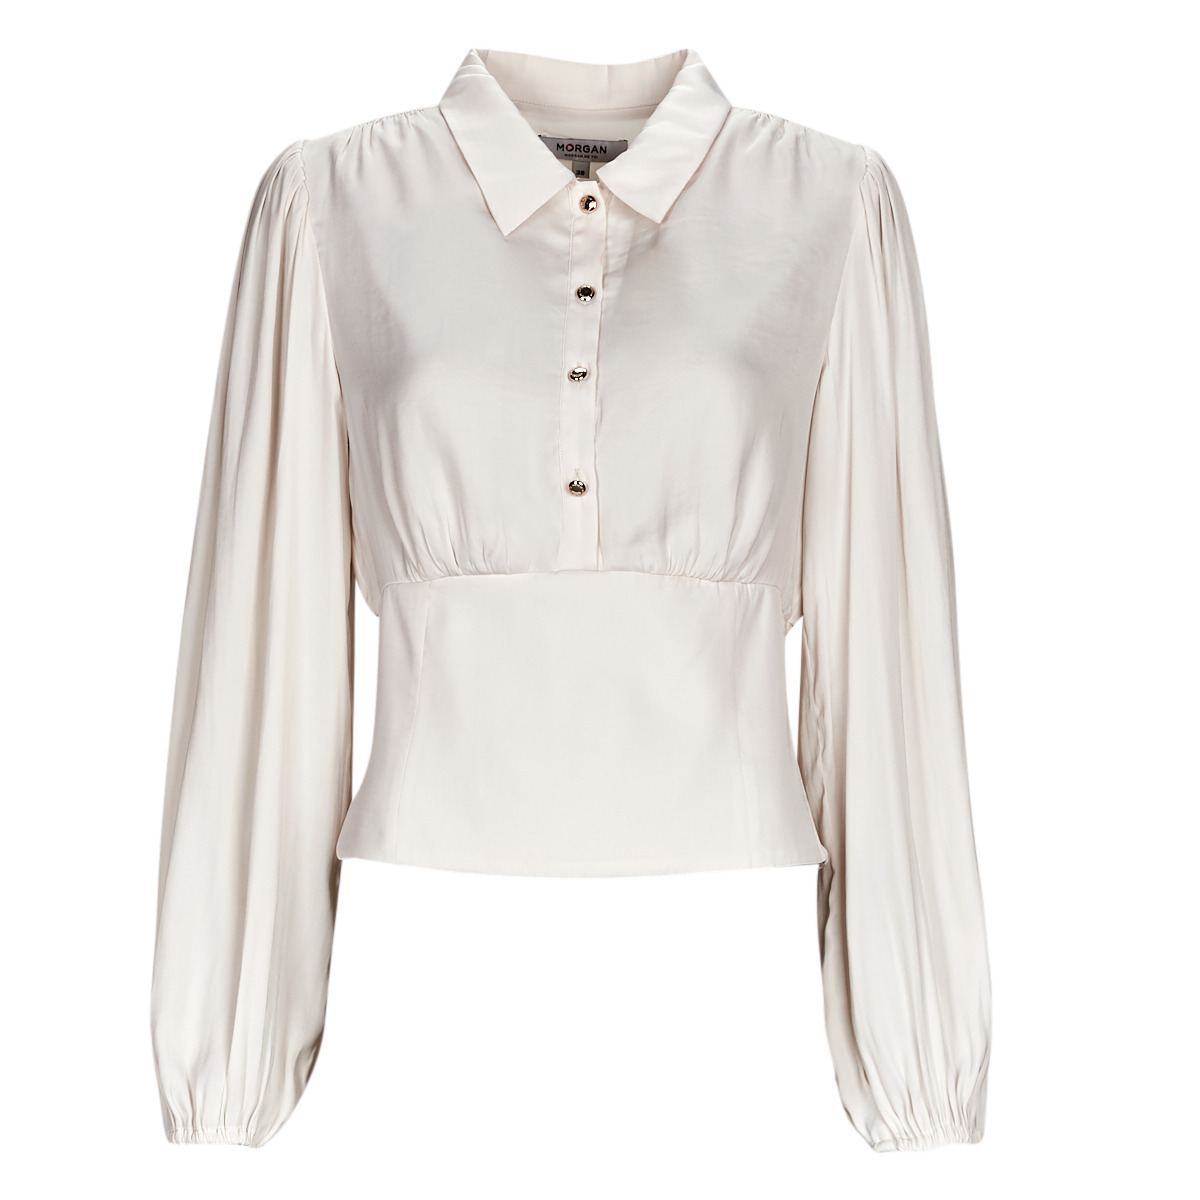 Spartoo - Blouse Beige for Women by Morgan GOOFASH